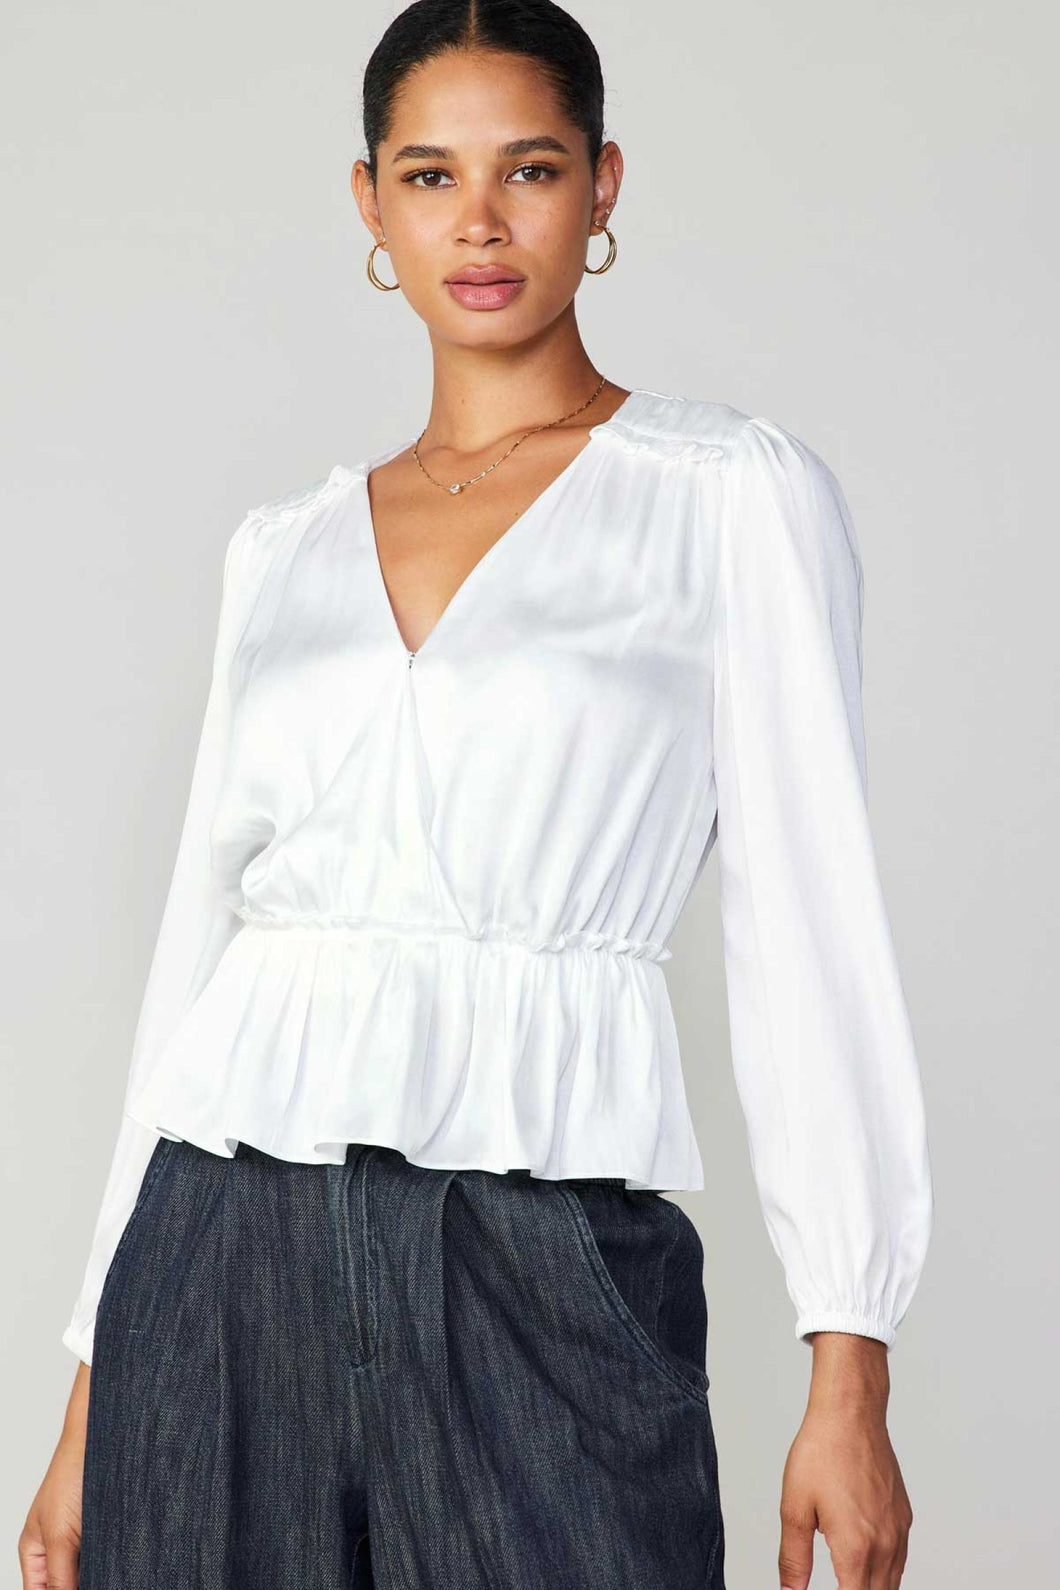 Elevate your style with this white V-neck blouse featuring beautiful ruffles and long sleeves.